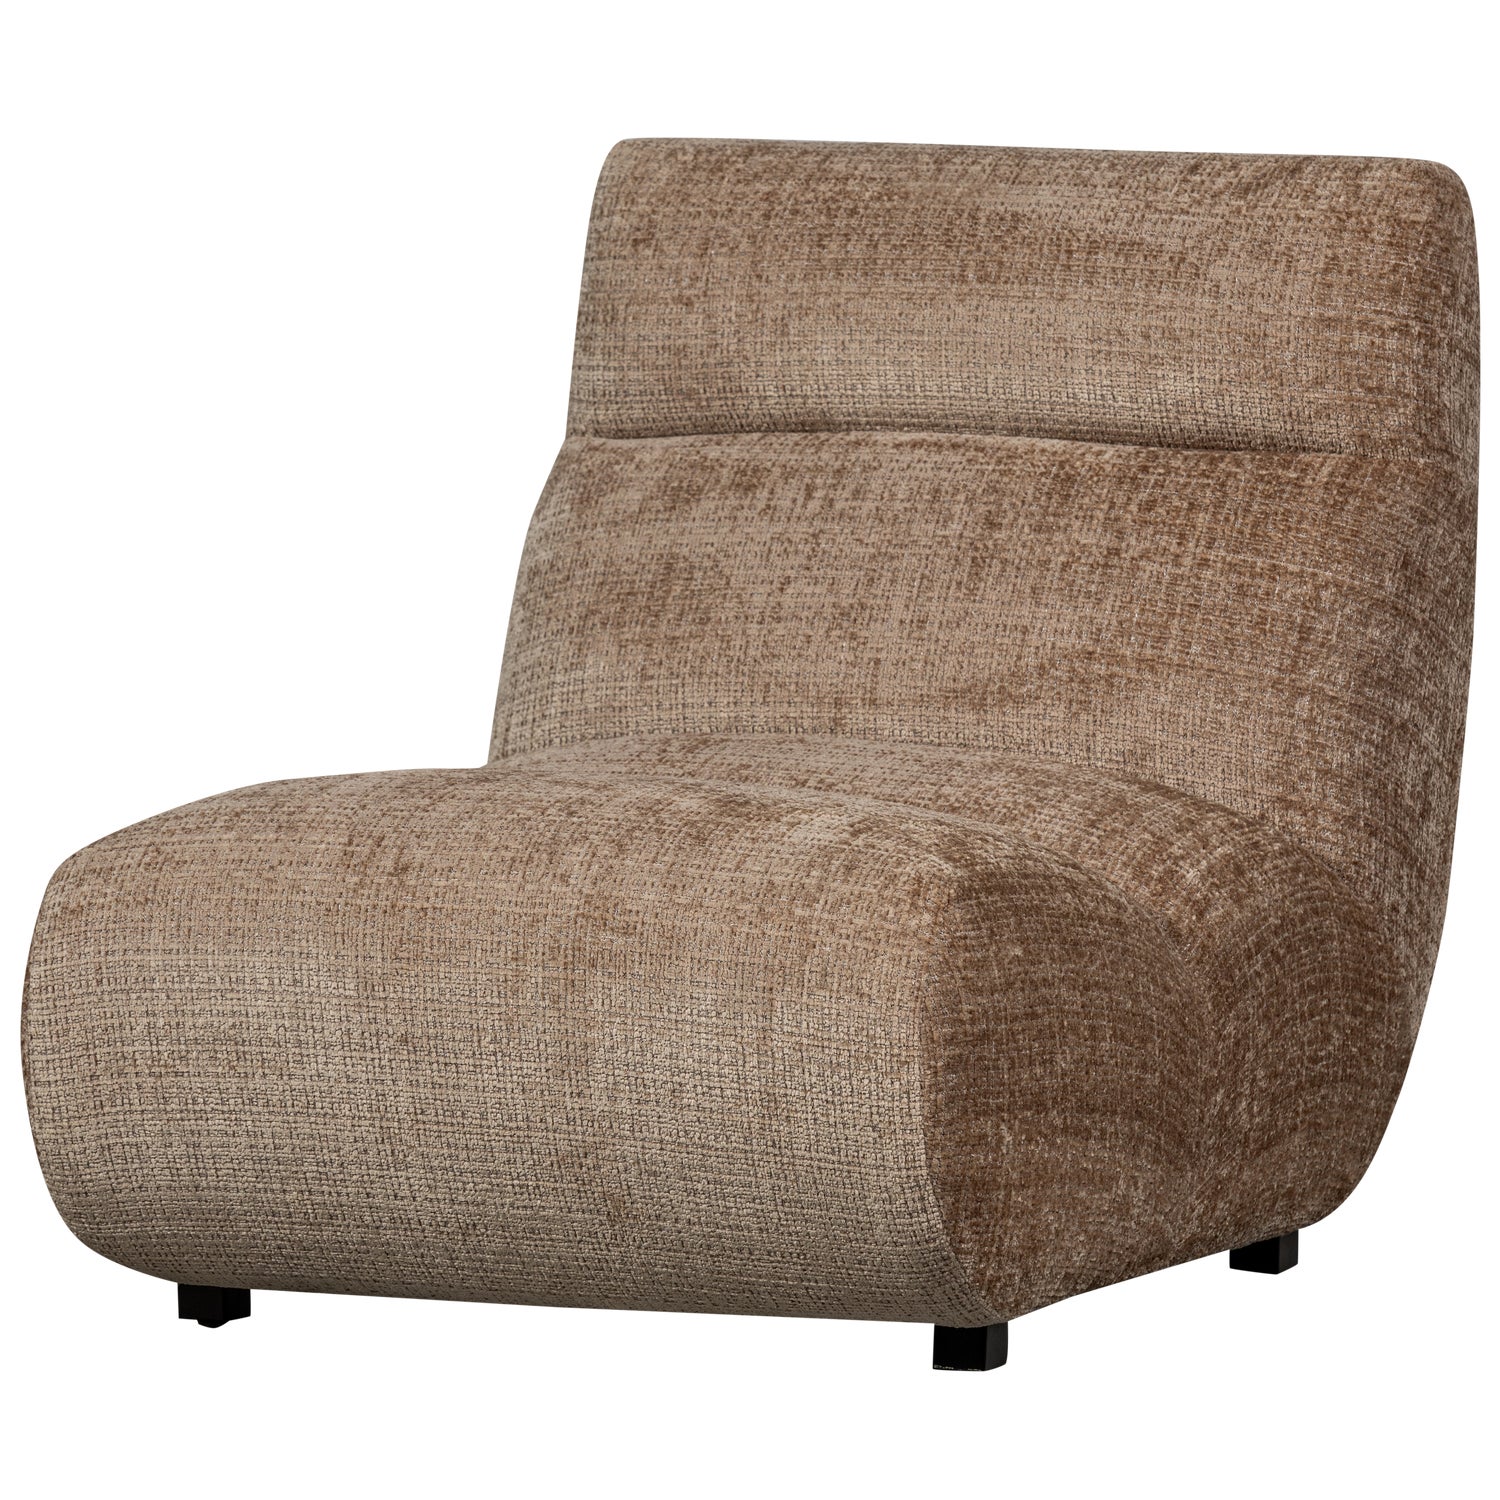 801430-C-02_VS_BP_Observe_fauteuil_clay_SA.png?auto=webp&format=png&width=1500&height=1500